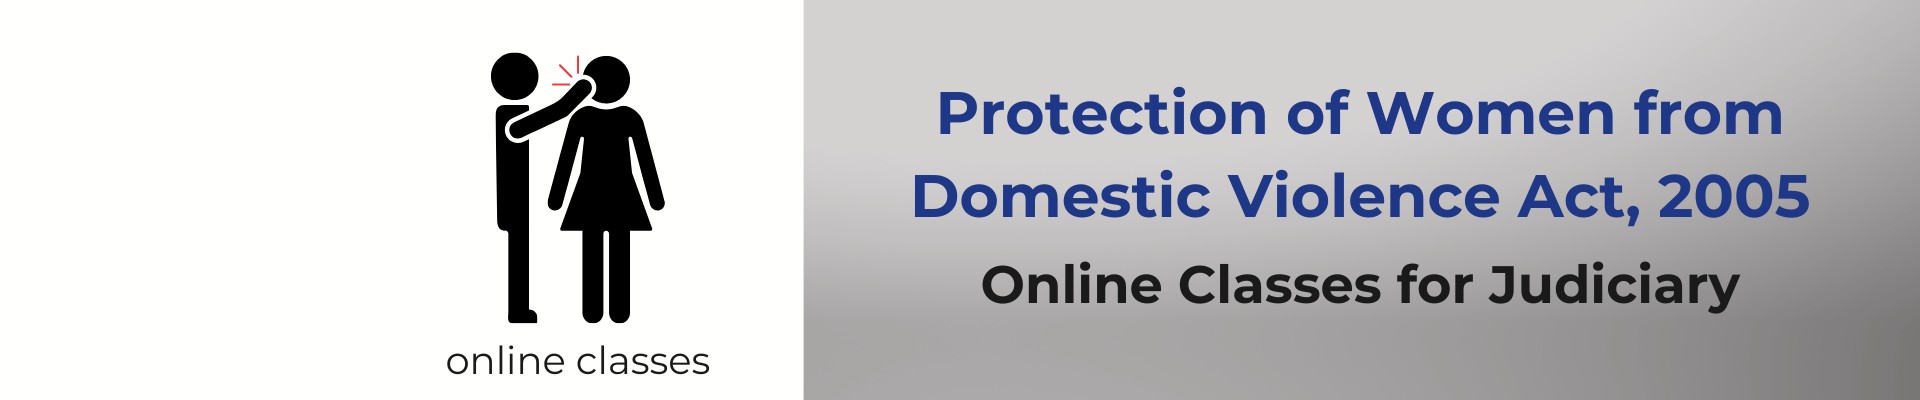 PROTECTION OF WOMEN FROM DOMESTIC VIOLENCE ACT